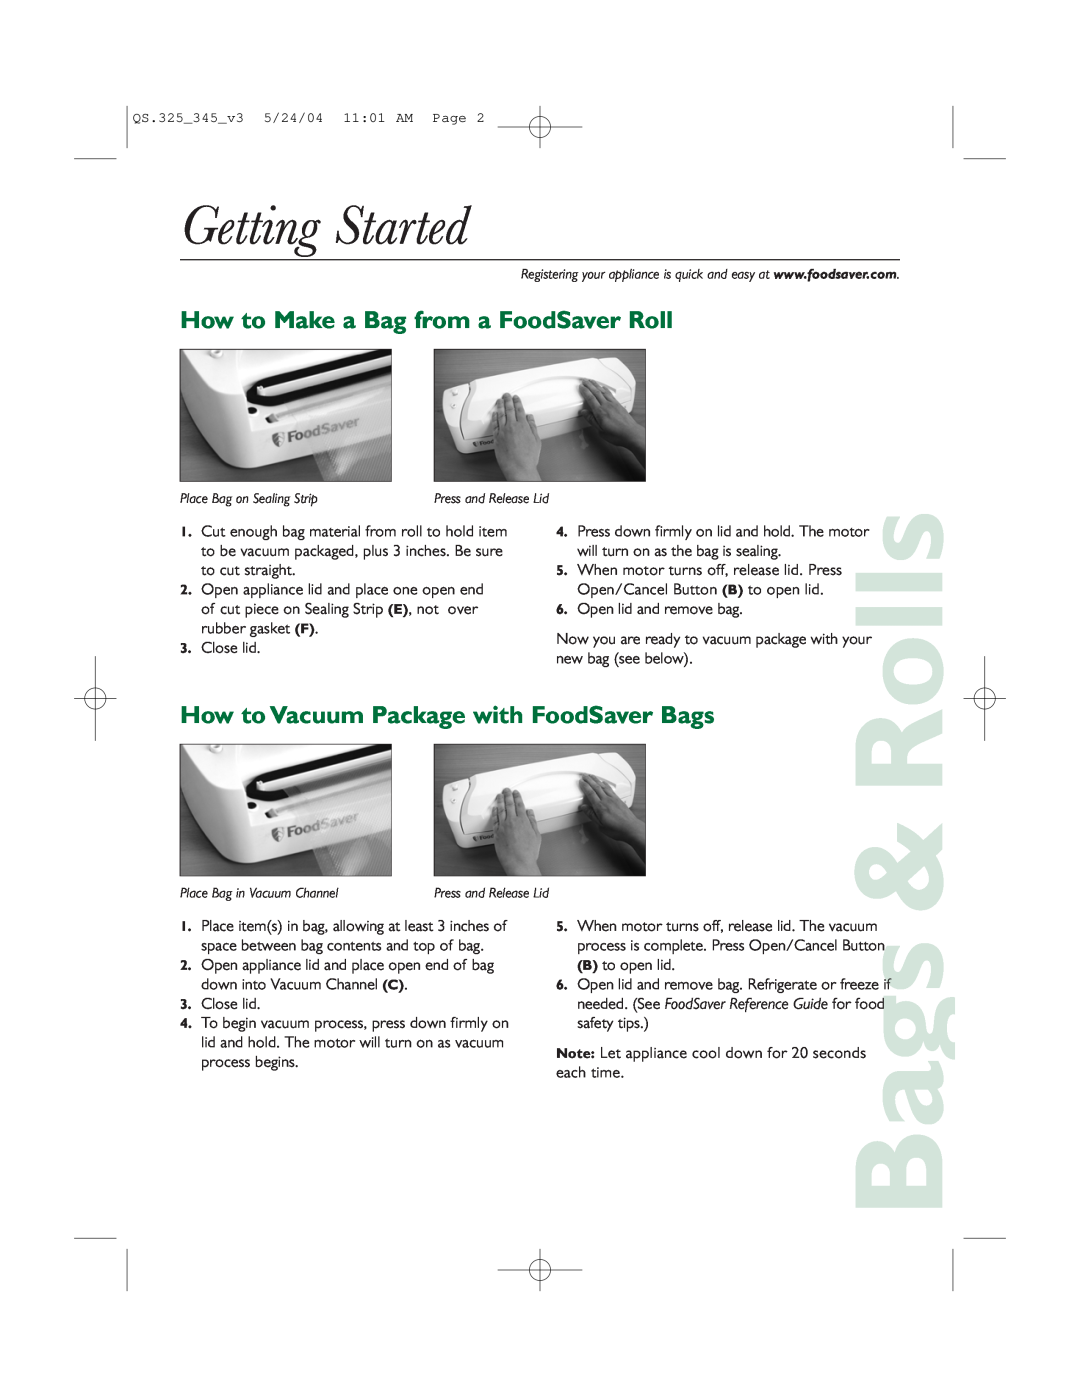 FoodSaver V325 Getting Started, How to Make a Bag from a FoodSaver Roll, How to Vacuum Package with FoodSaver Bags, Rolls 